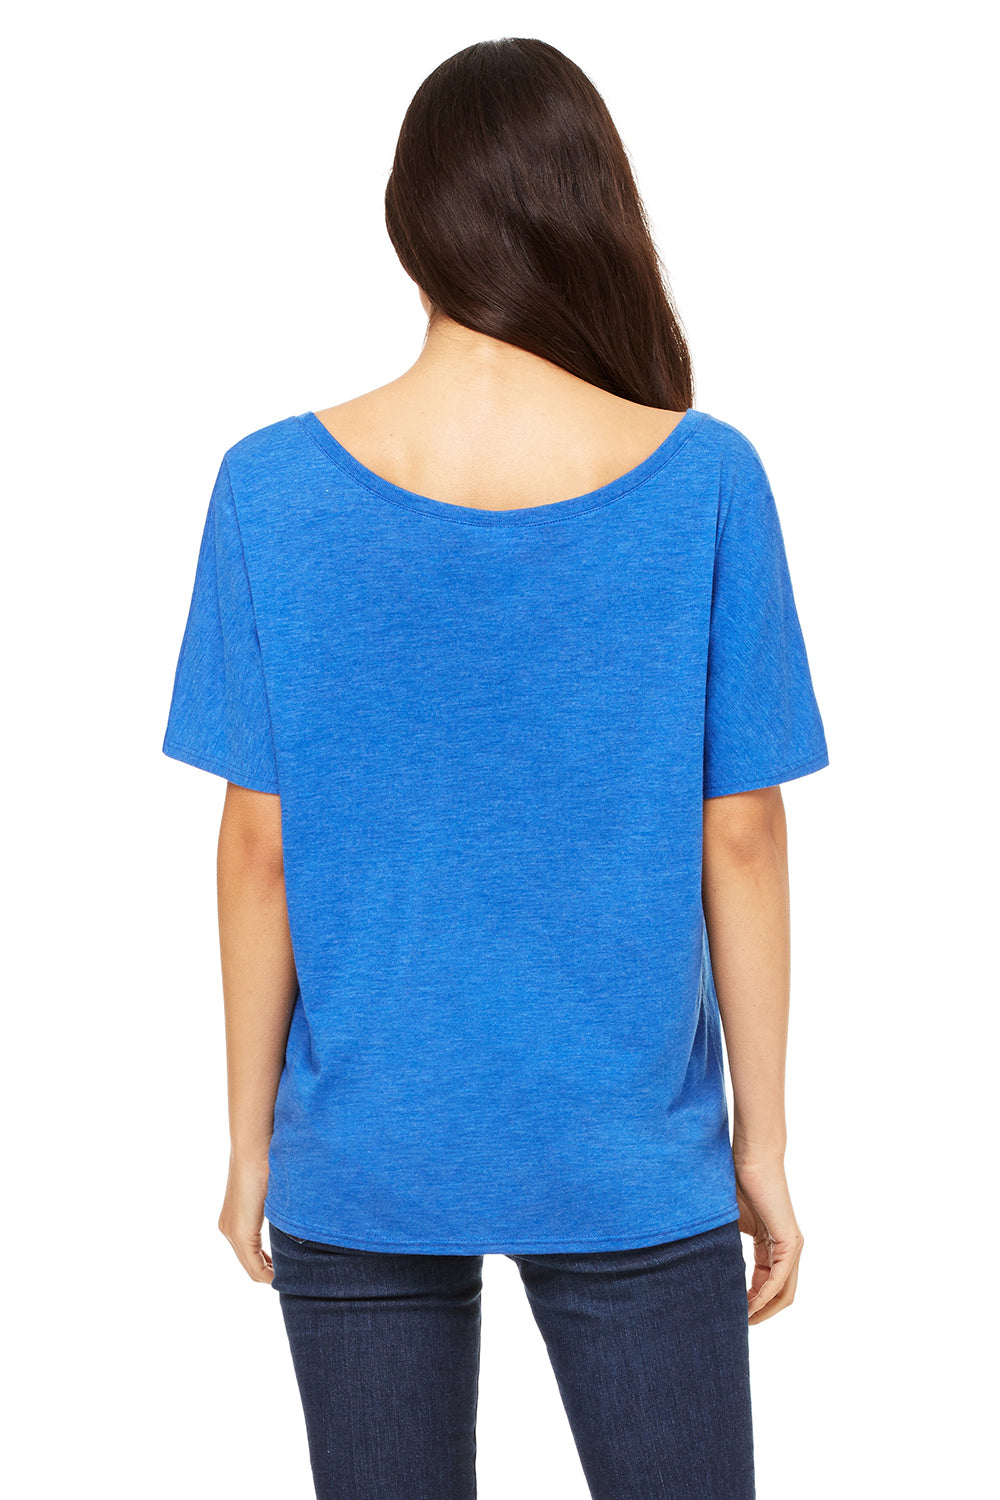 Bella + Canvas 8816 Womens Slouchy Short Sleeve Wide Neck T-Shirt Royal Blue Triblend Back